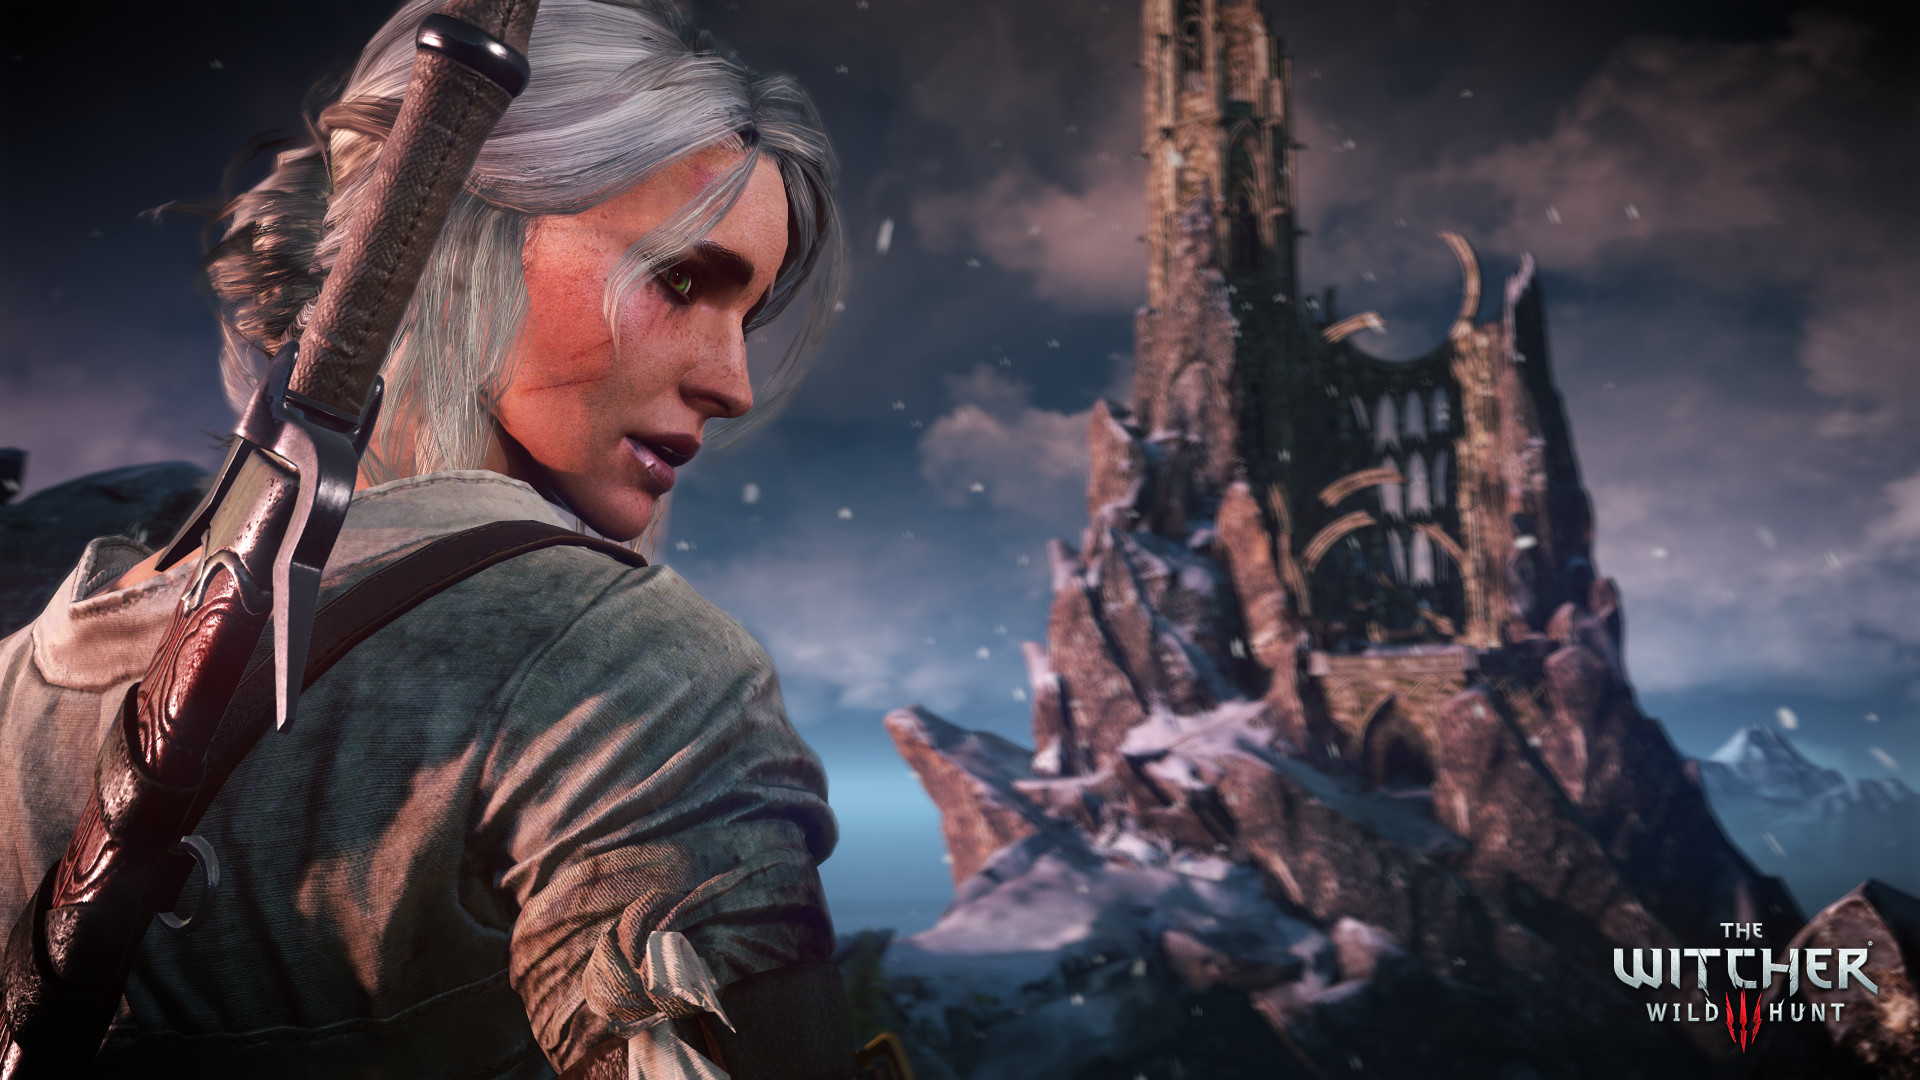 The Witcher 3 is finally getting a photo mode in its new-gen update